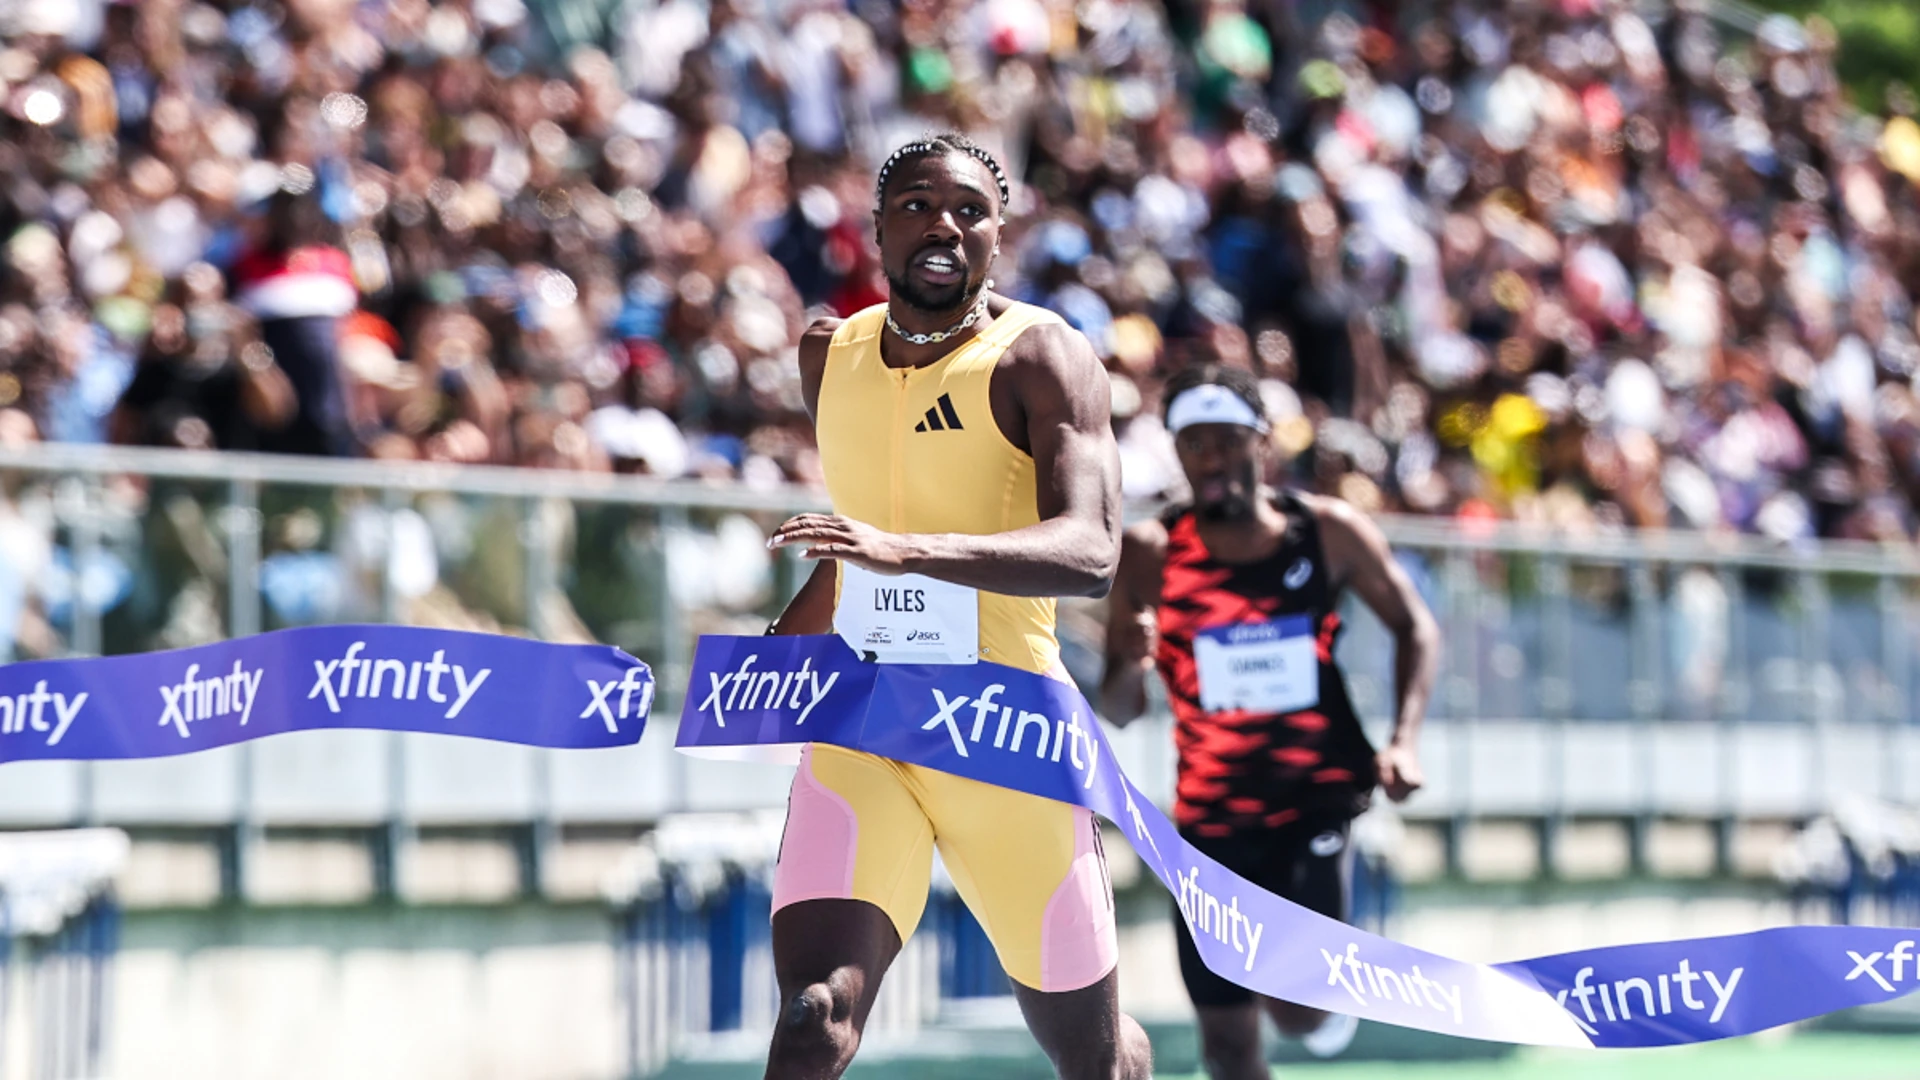 Lyles brings star power to track at US trials